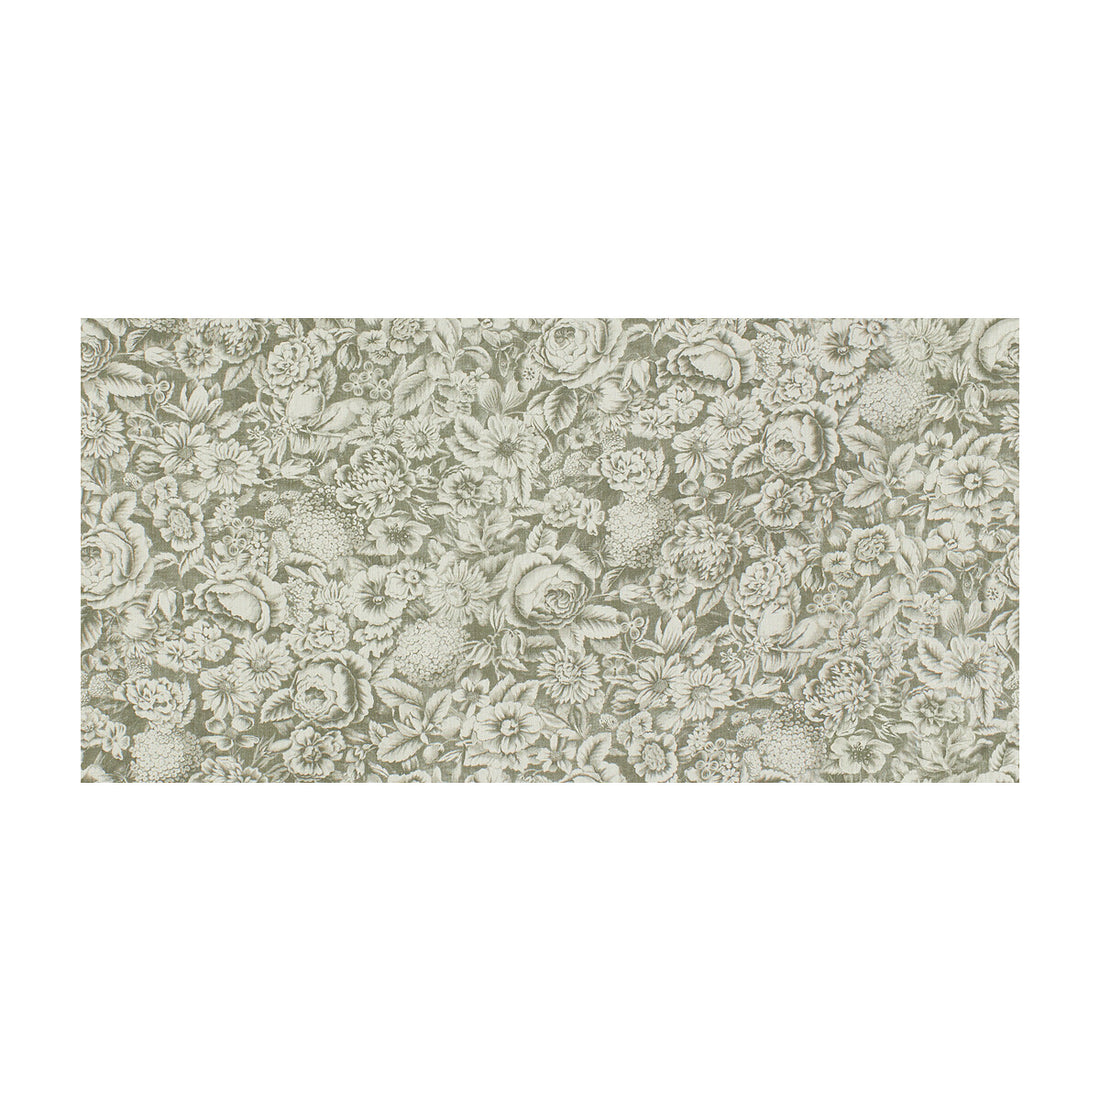 Ennismore fabric in sterling color - pattern ENNISMORE.11.0 - by Kravet Basics in the Sarah Richardson Affinity collection